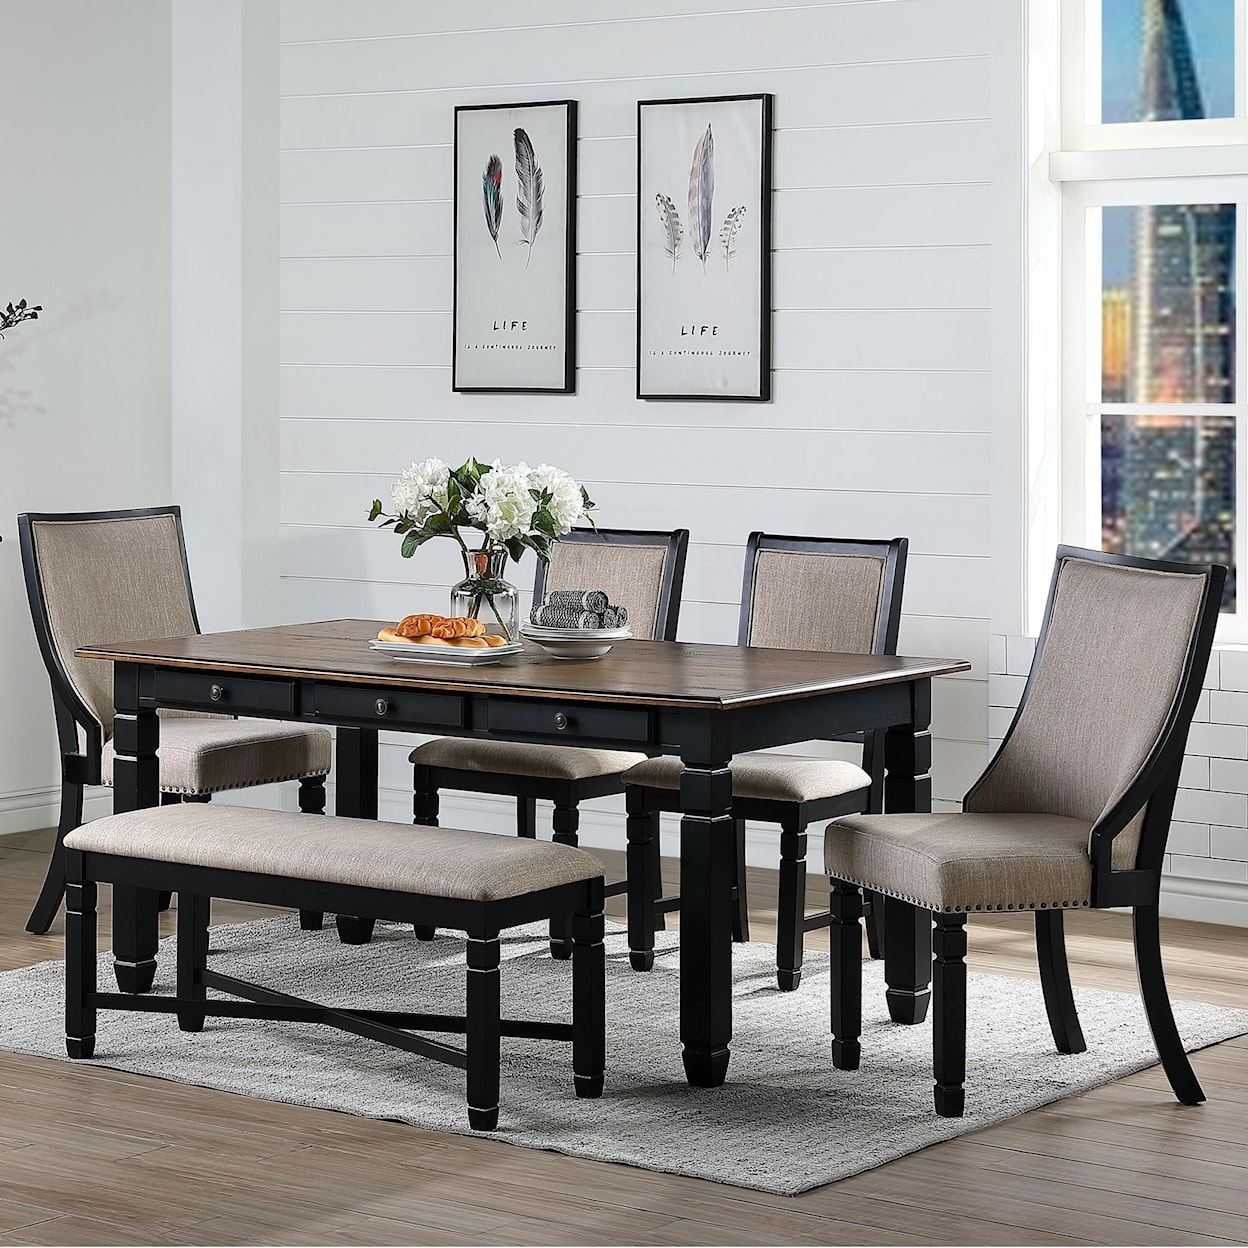 New Classic Furniture Prairie Point Table & Chair Set with Bench